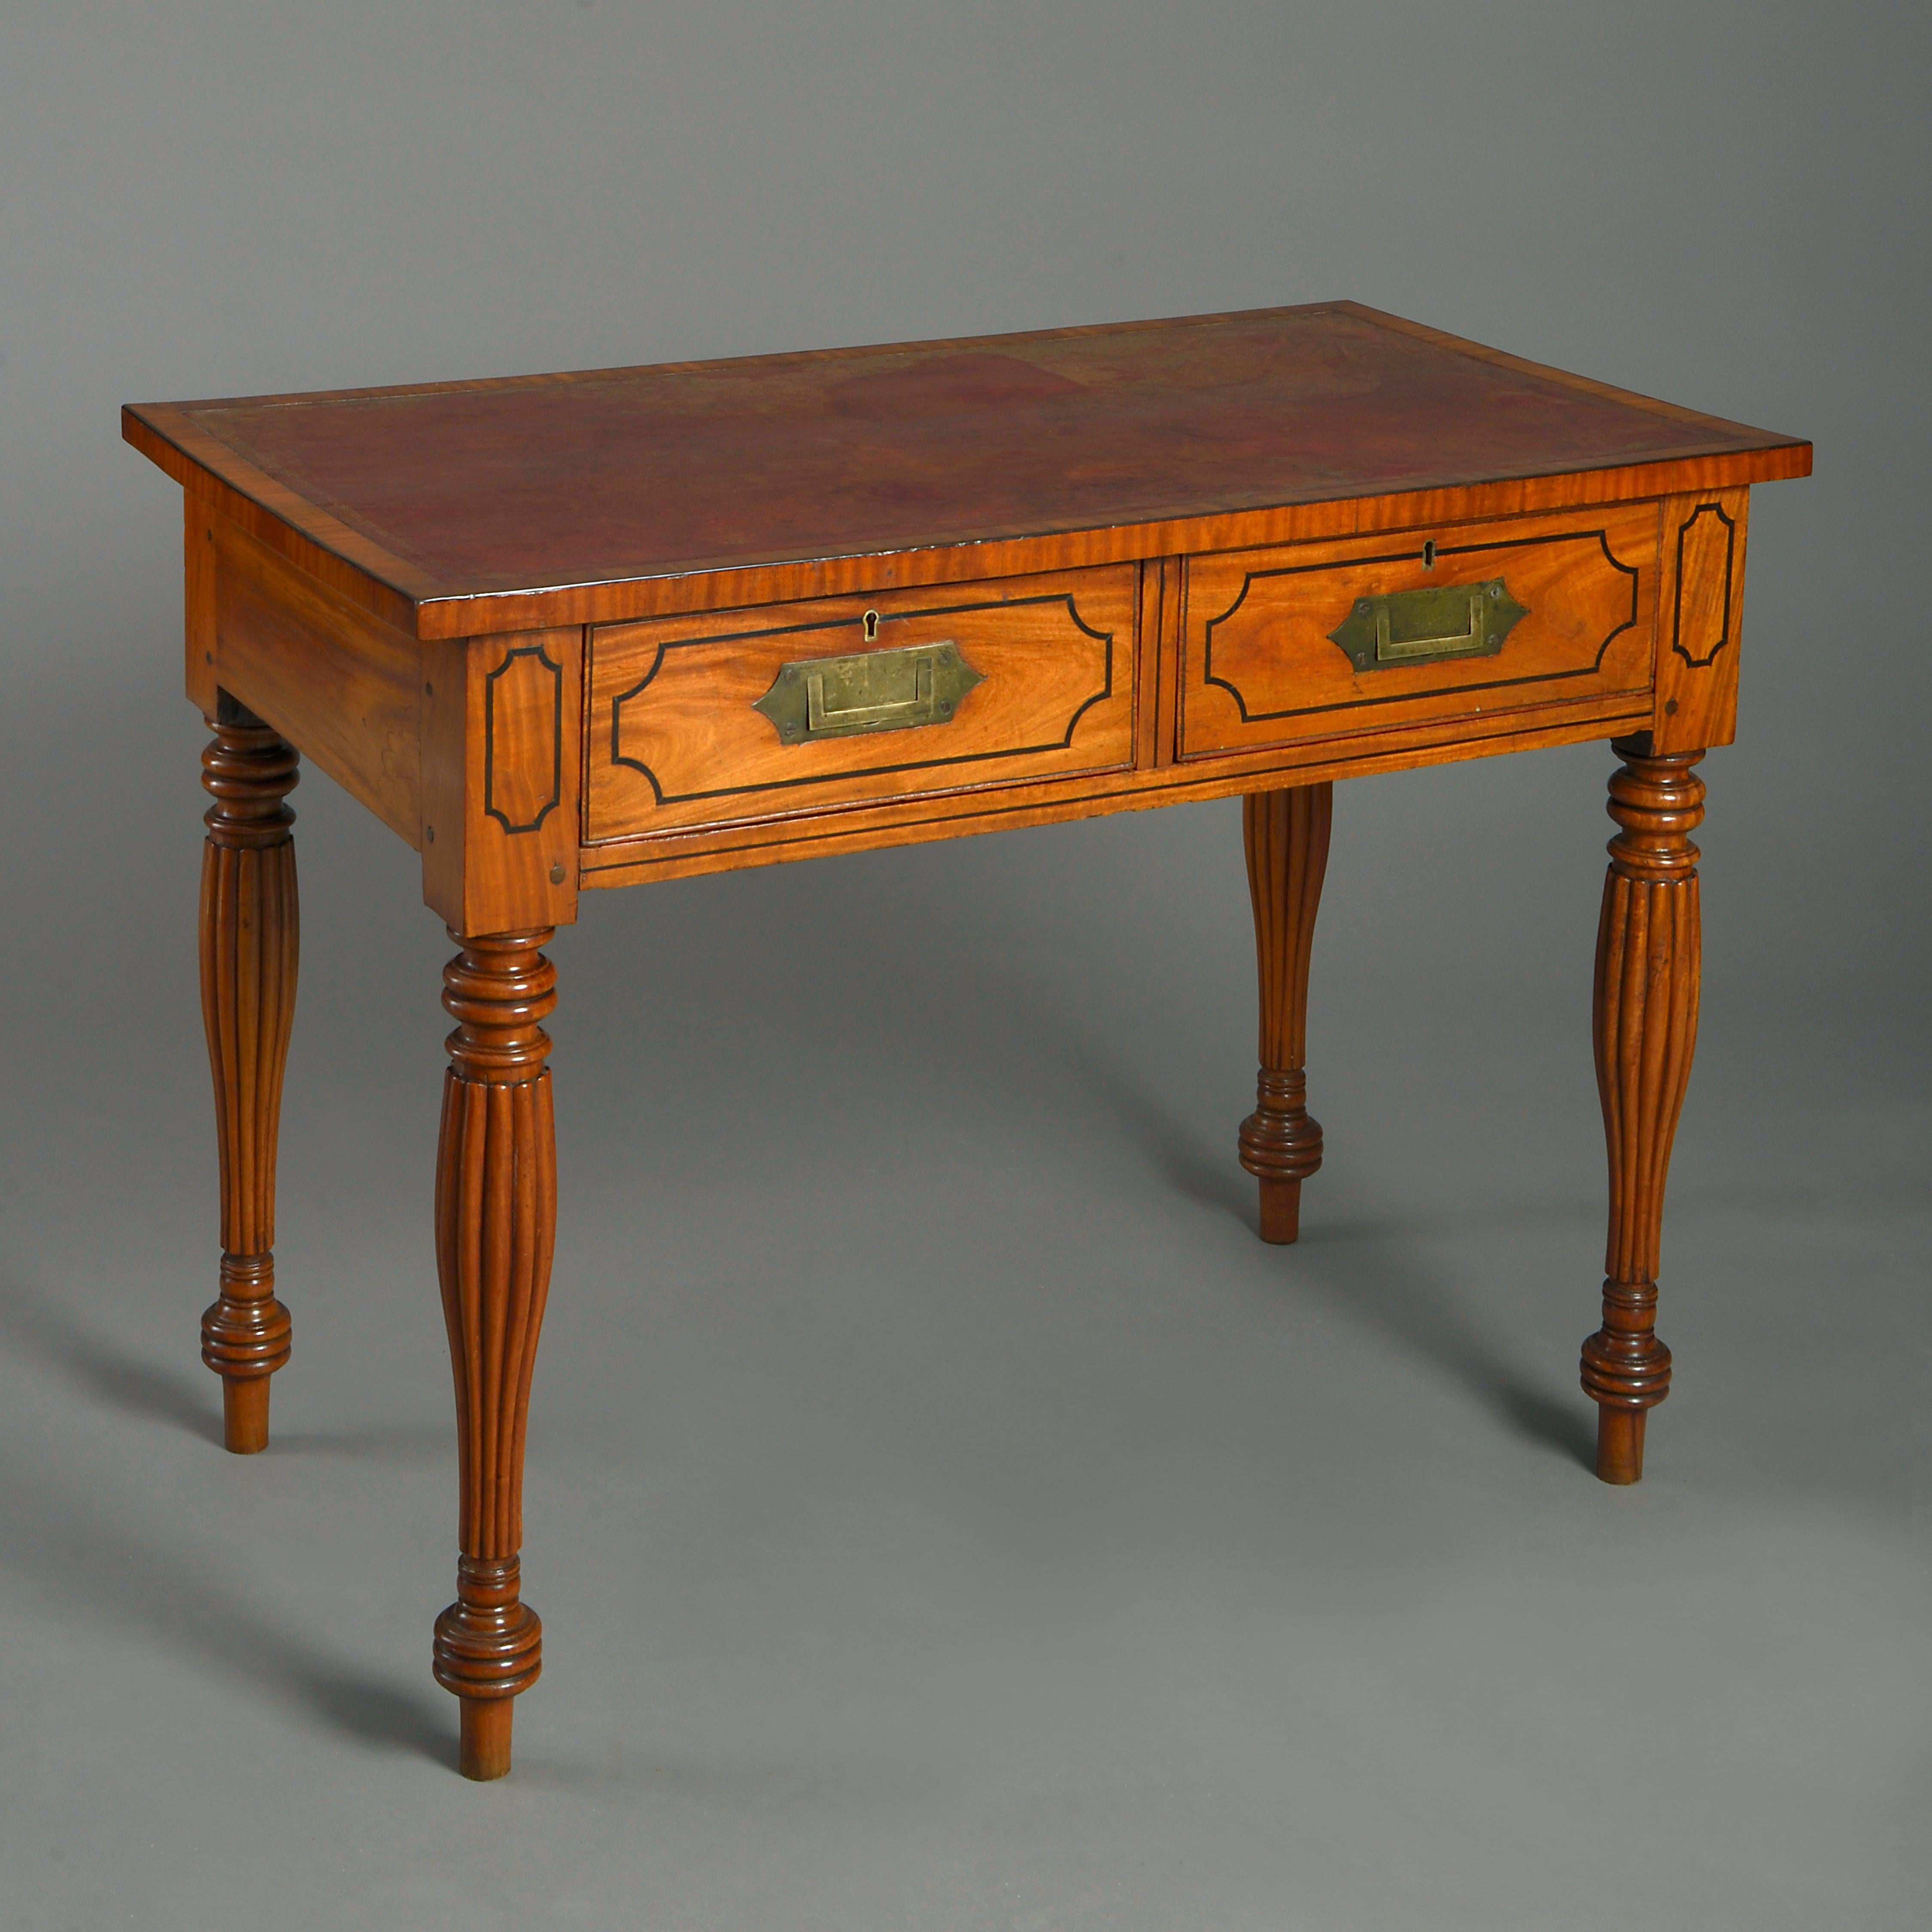 An early 19th century Anglo-Ceylonese satinwood Campaign desk, the original red leather top inset above two short drawers with ebony stringing and sunken brass handles and raised upon generously turned and fluted legs.

        